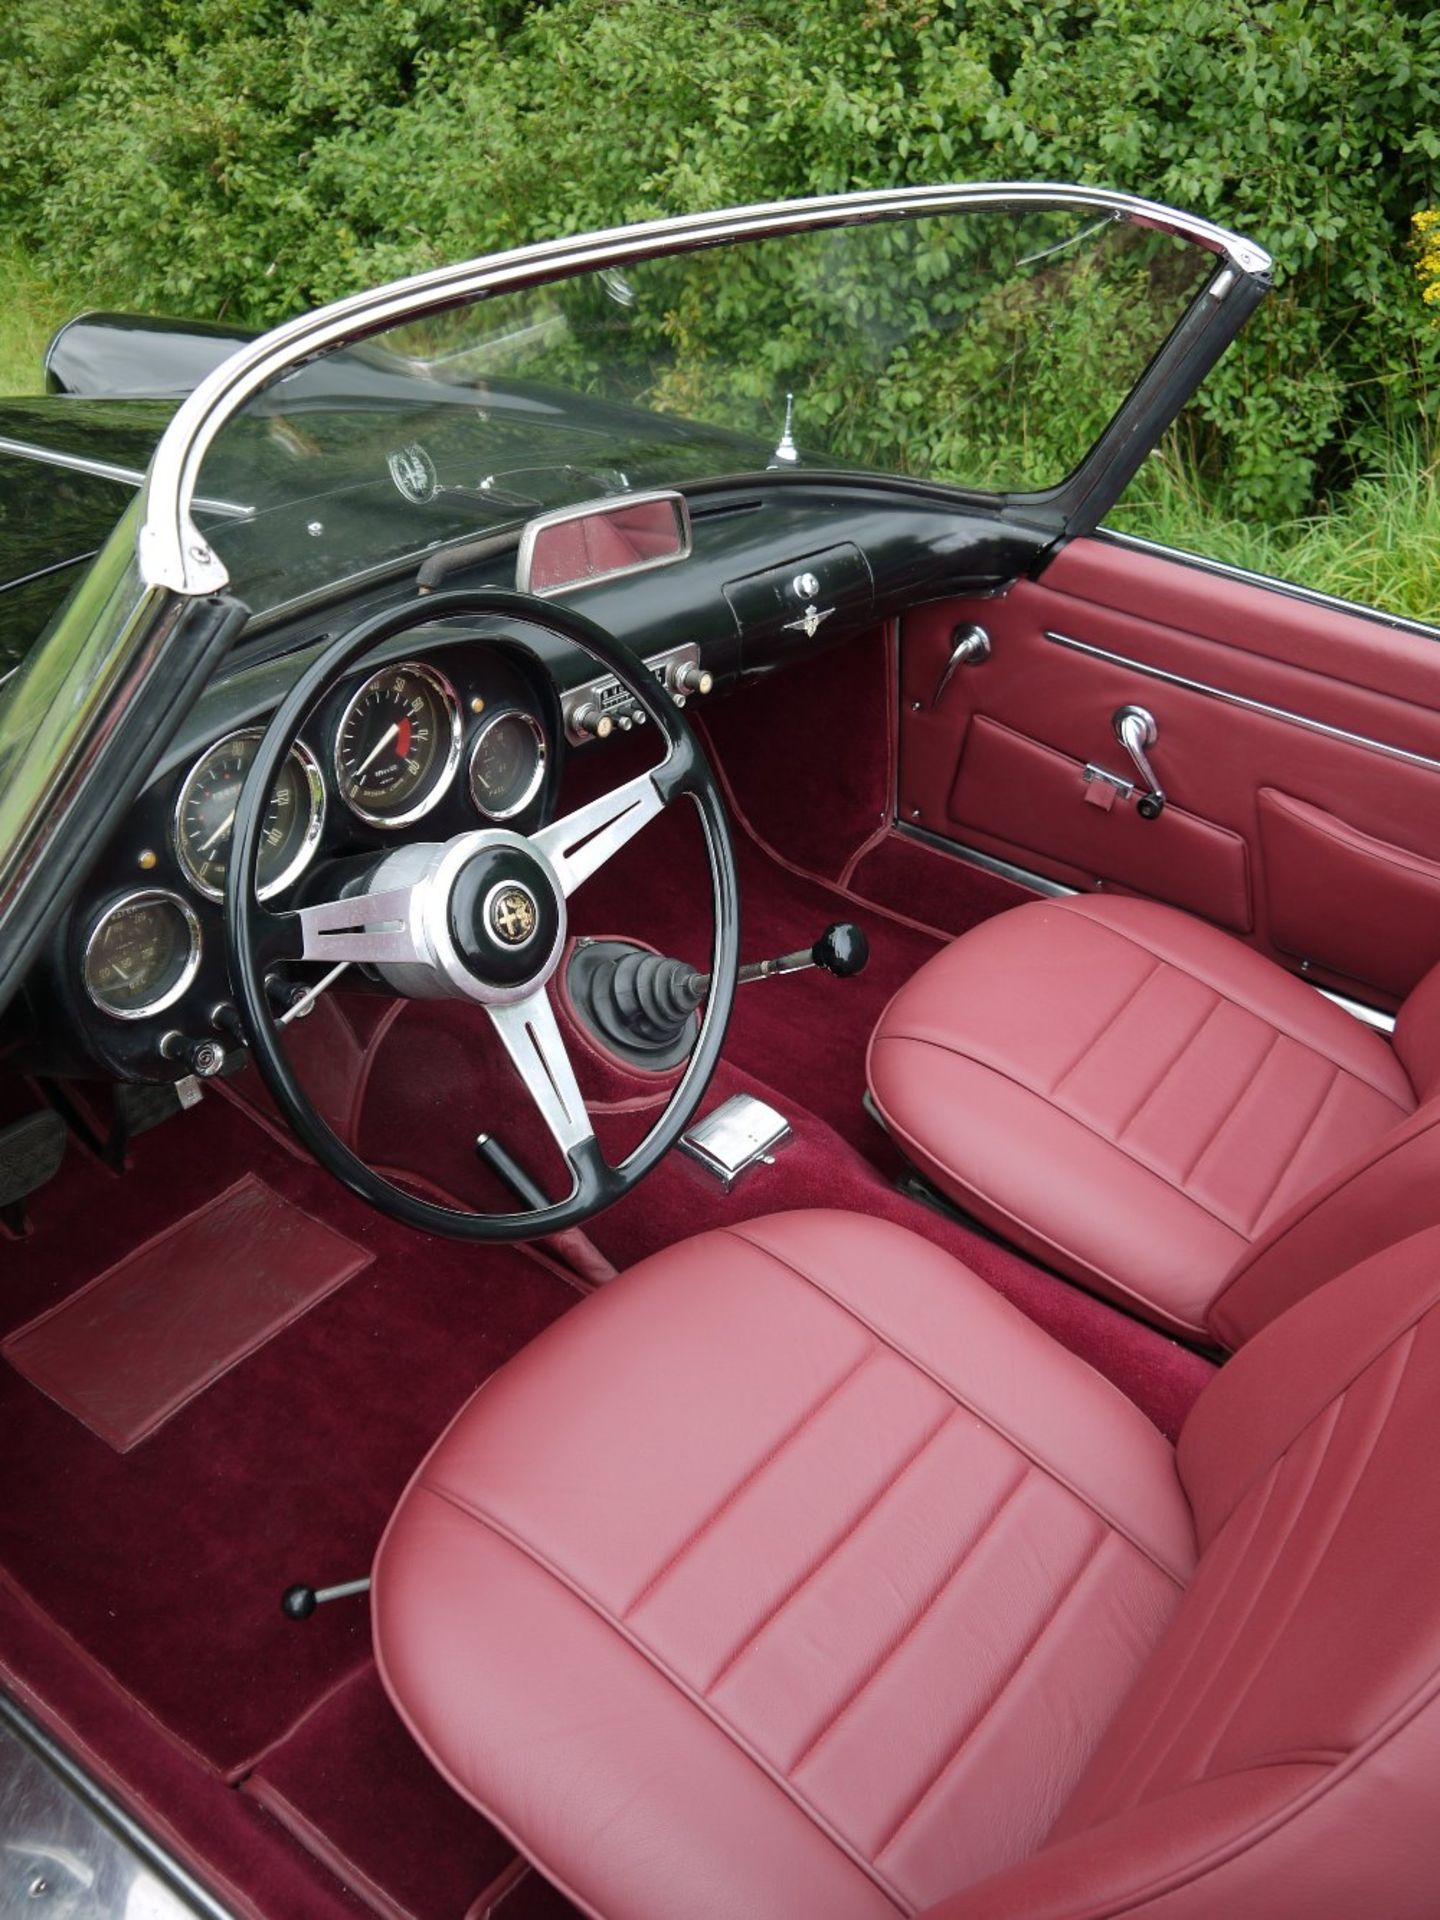 1960 ALFA ROMEO TOURING SPIDER Registration Number: 307 XVJ Chassis Number: AR*10204*000517 Recorded - Image 23 of 36